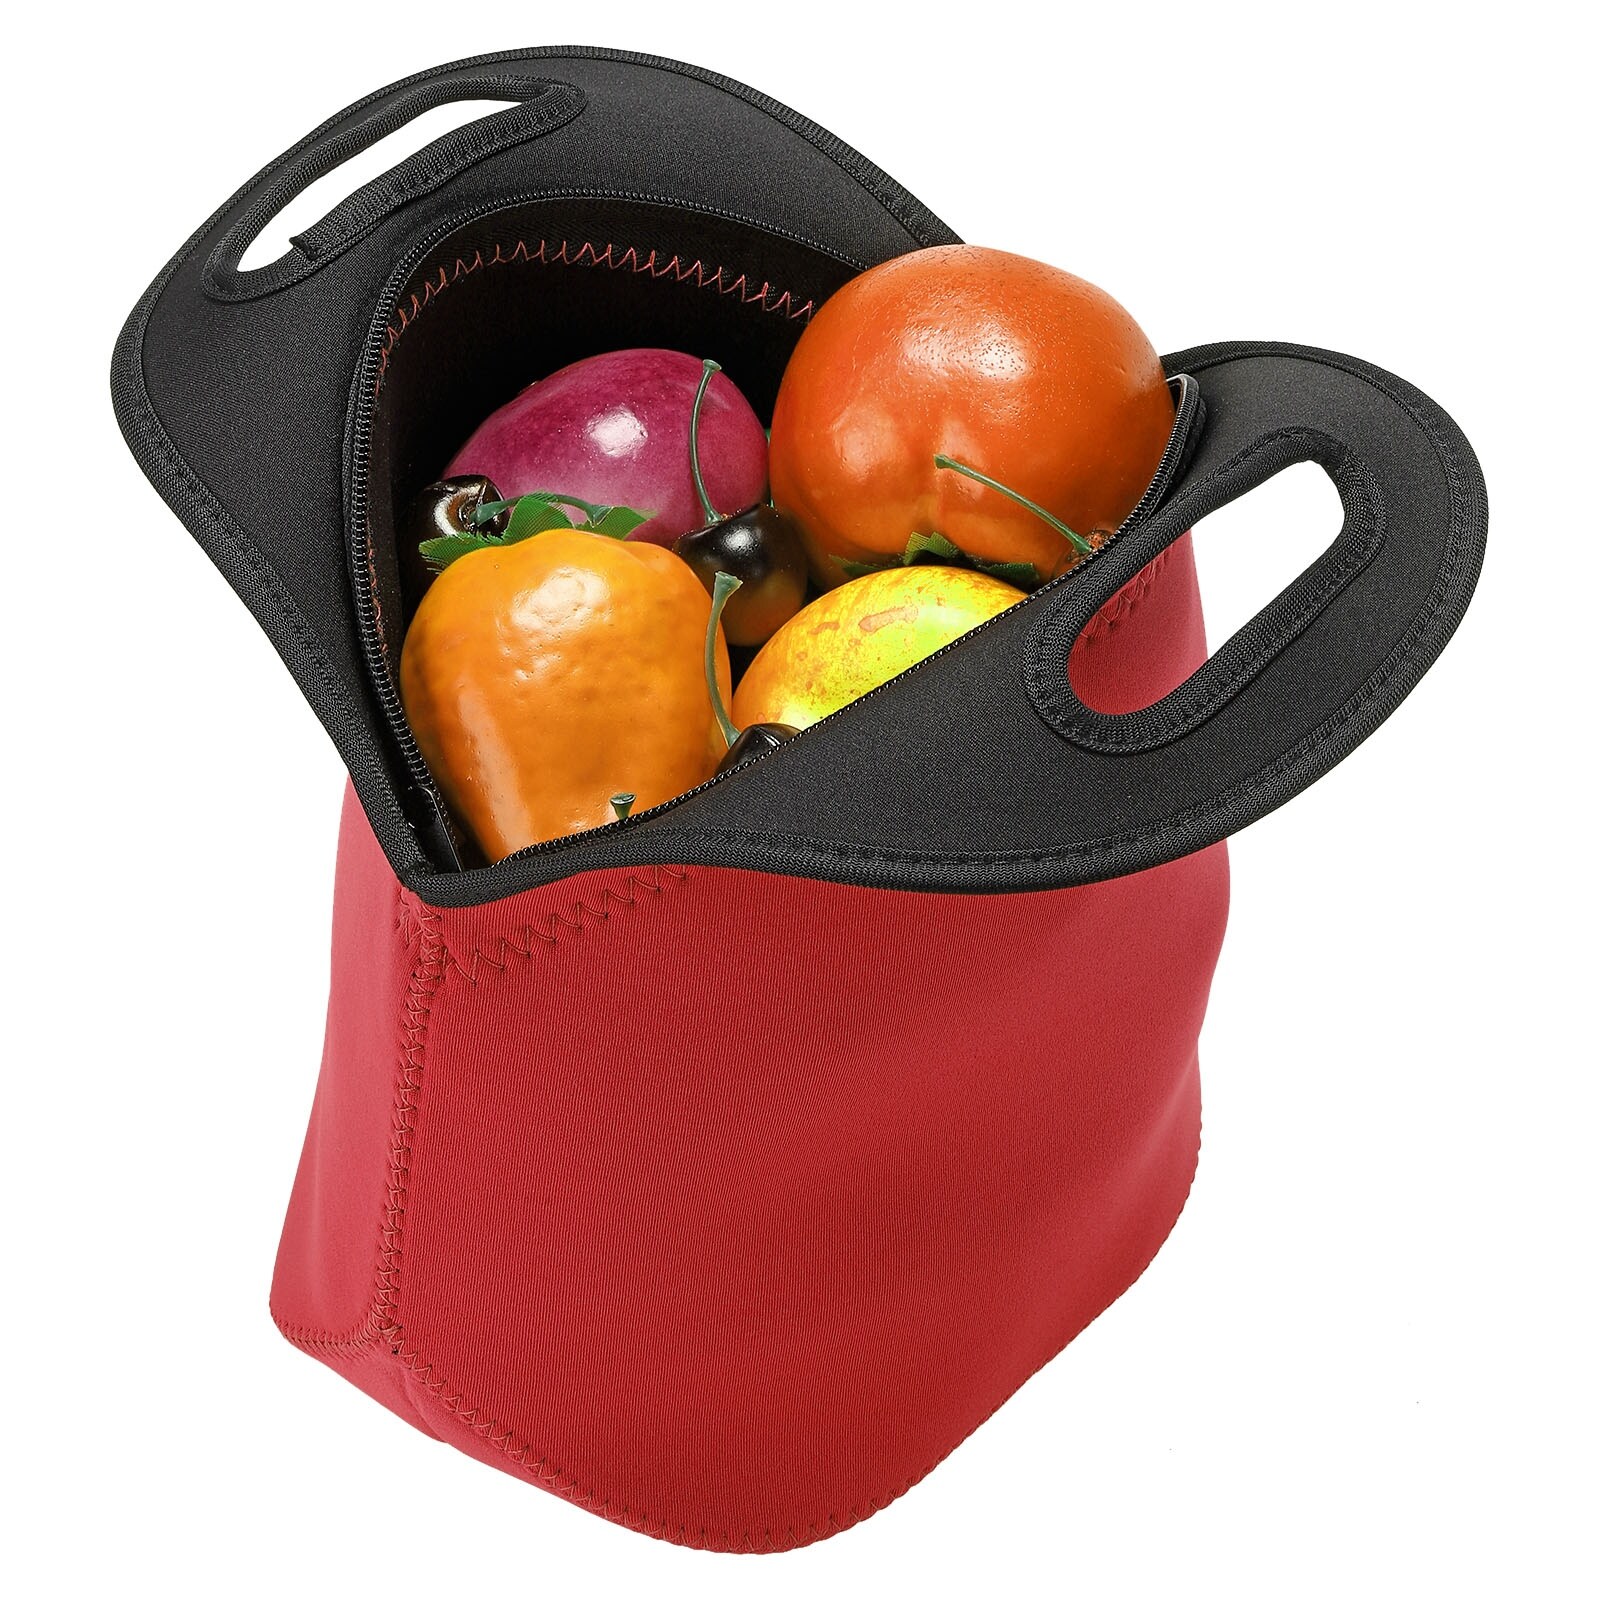 https://ak1.ostkcdn.com/images/products/is/images/direct/ba30ecfd3bc52677a00eb28629656cb76653d8da/Insulated-Lunch-Bags%2C-12%22x6%22x12%22-Thermal-Lunch-Portable-Containers-Bag.jpg